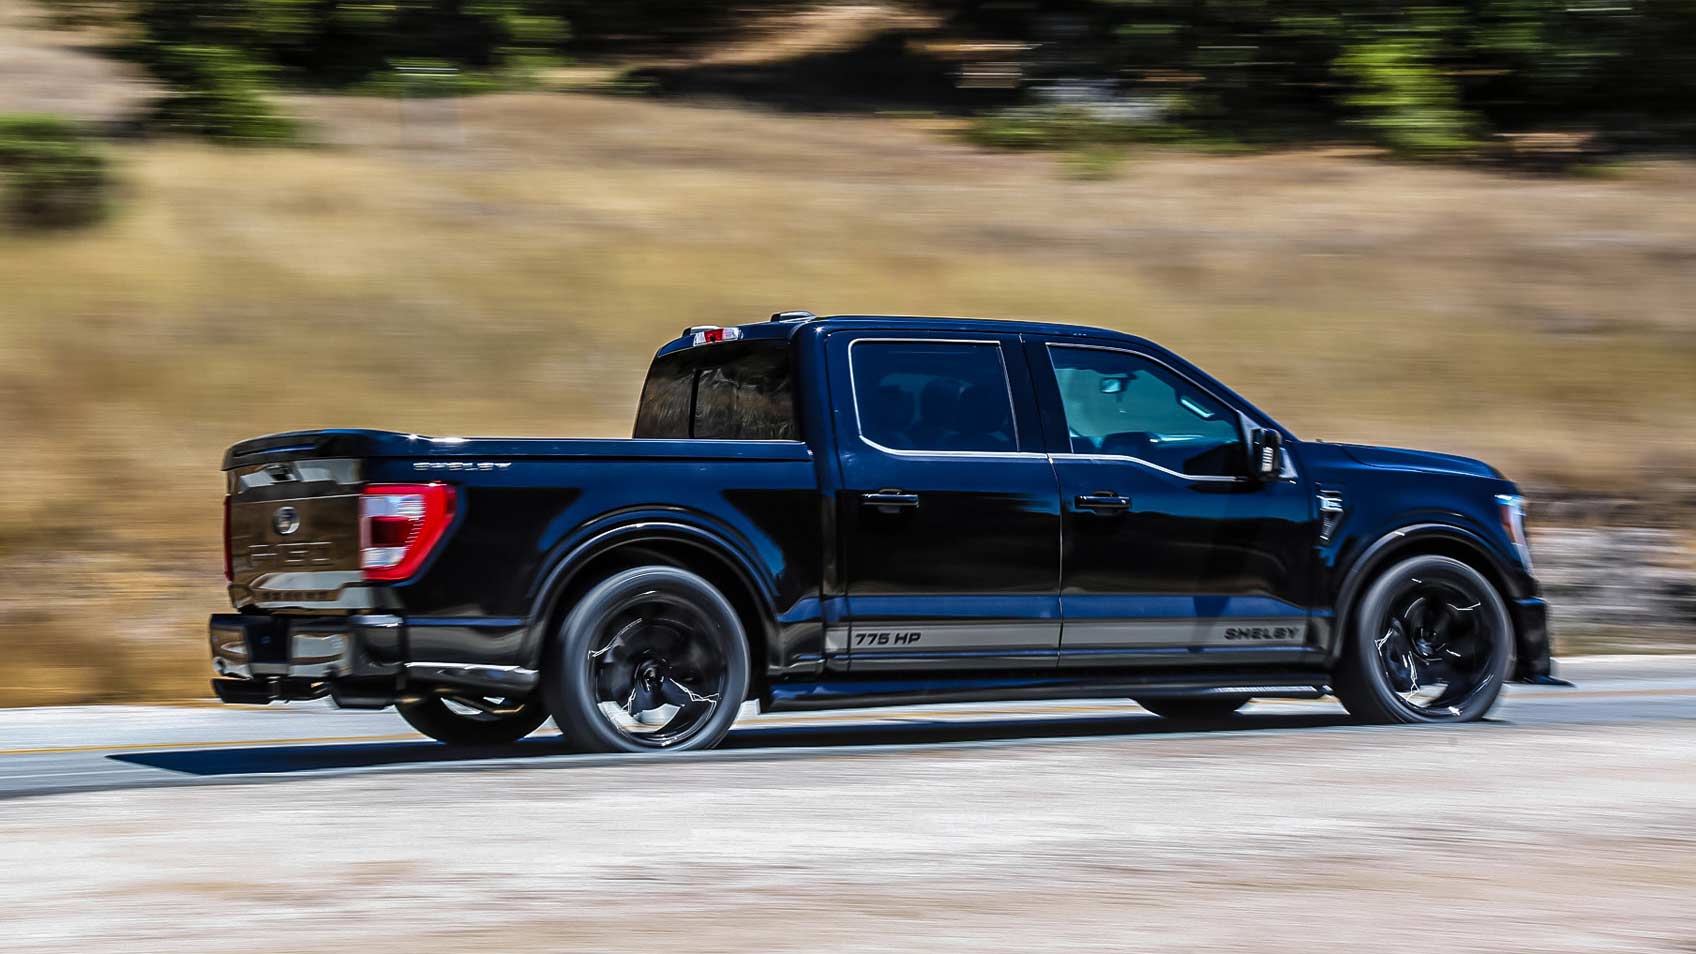 2021 Shelby F150 Super Snake Launch, Prices, Specs, Features